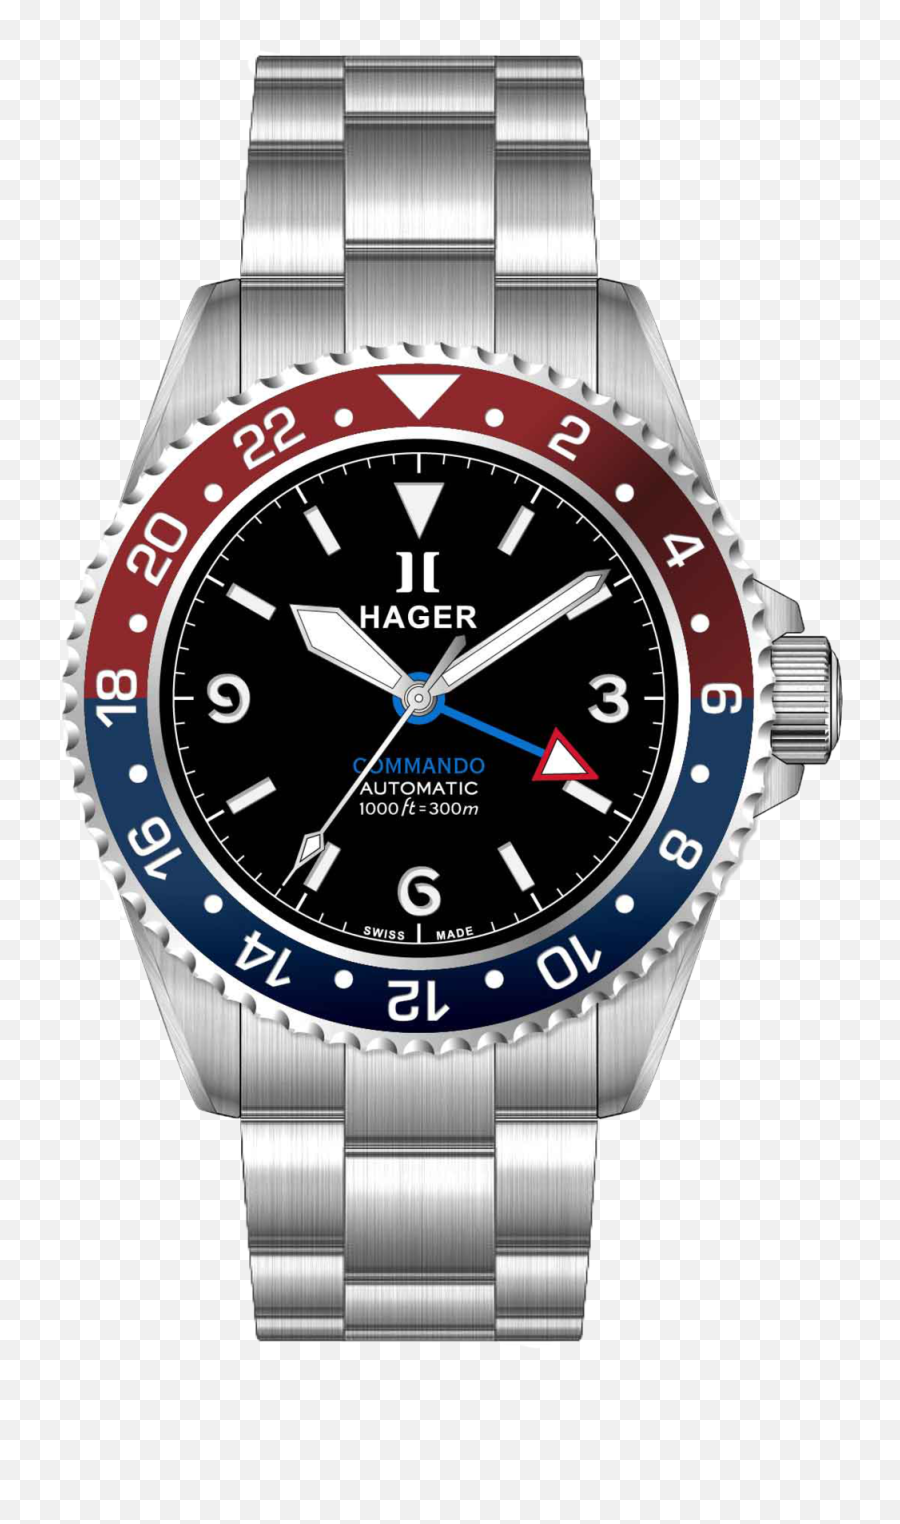 Hager Watches - Hager Gmt Traveler Watch Png,Metal Png